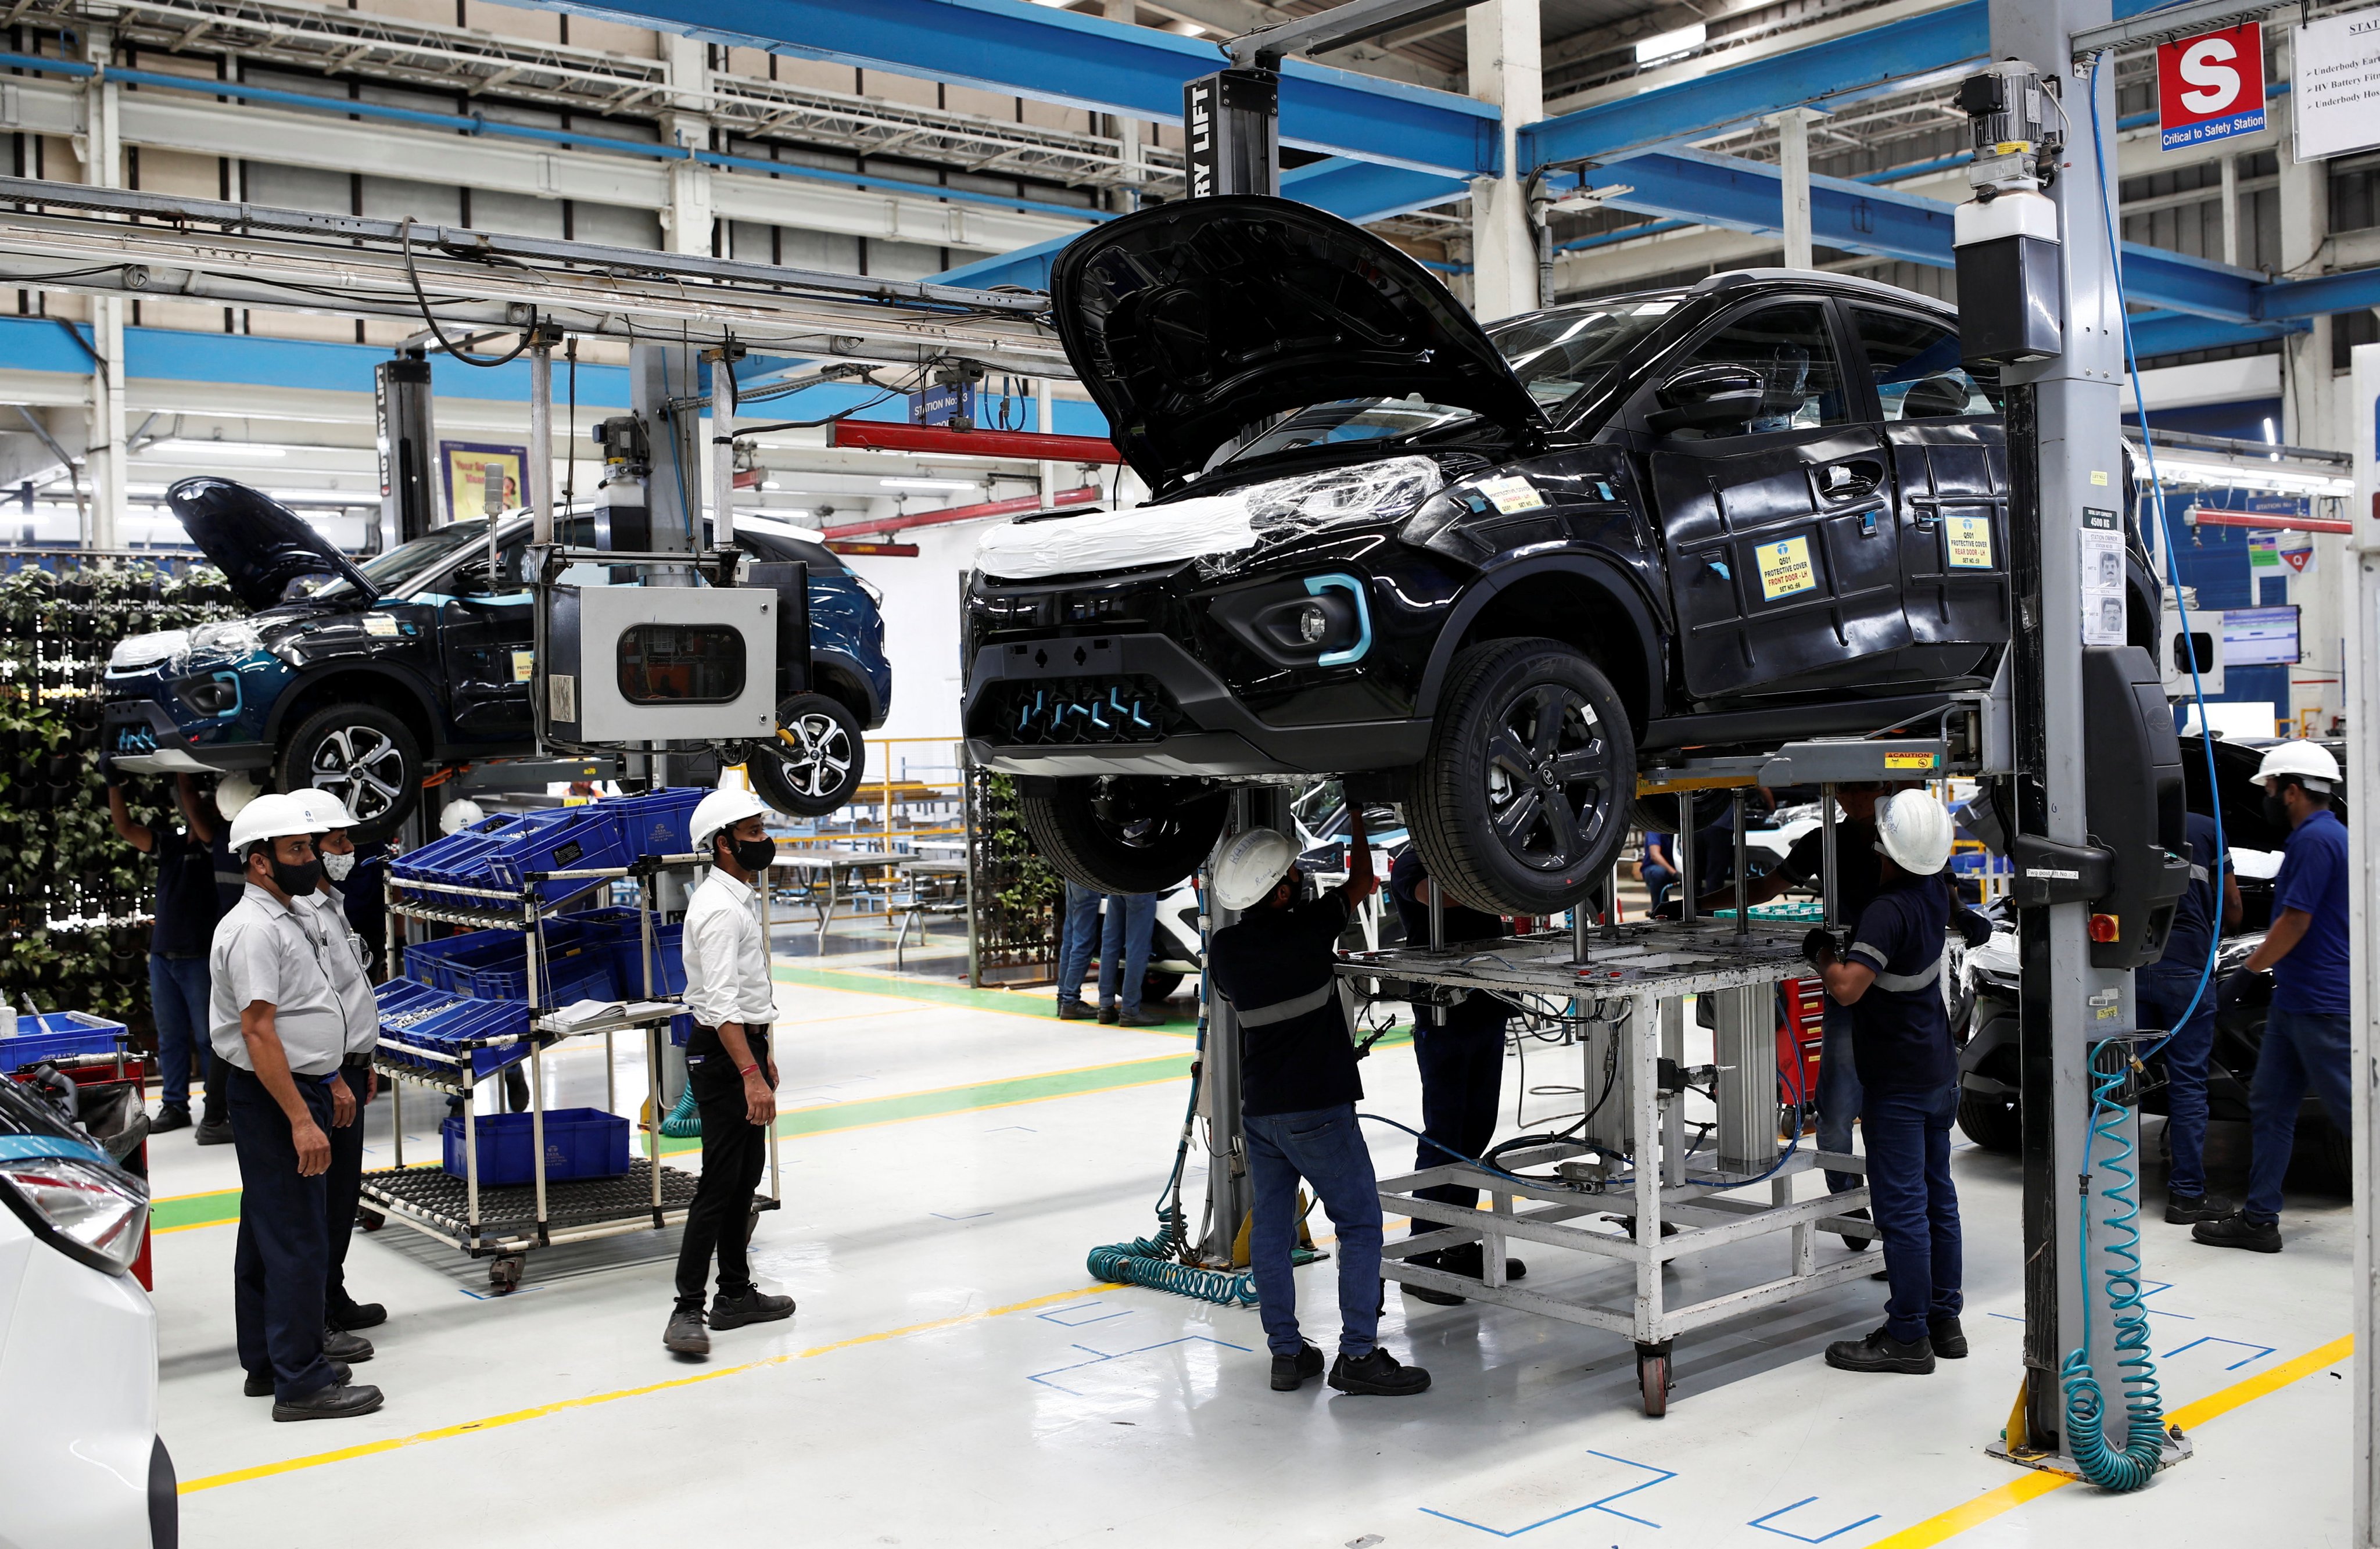 Workers inspect Tata Nexon electric sport utility vehicles at a Tata Motors plant in Pune, India, in 2022. Photo: Reuters